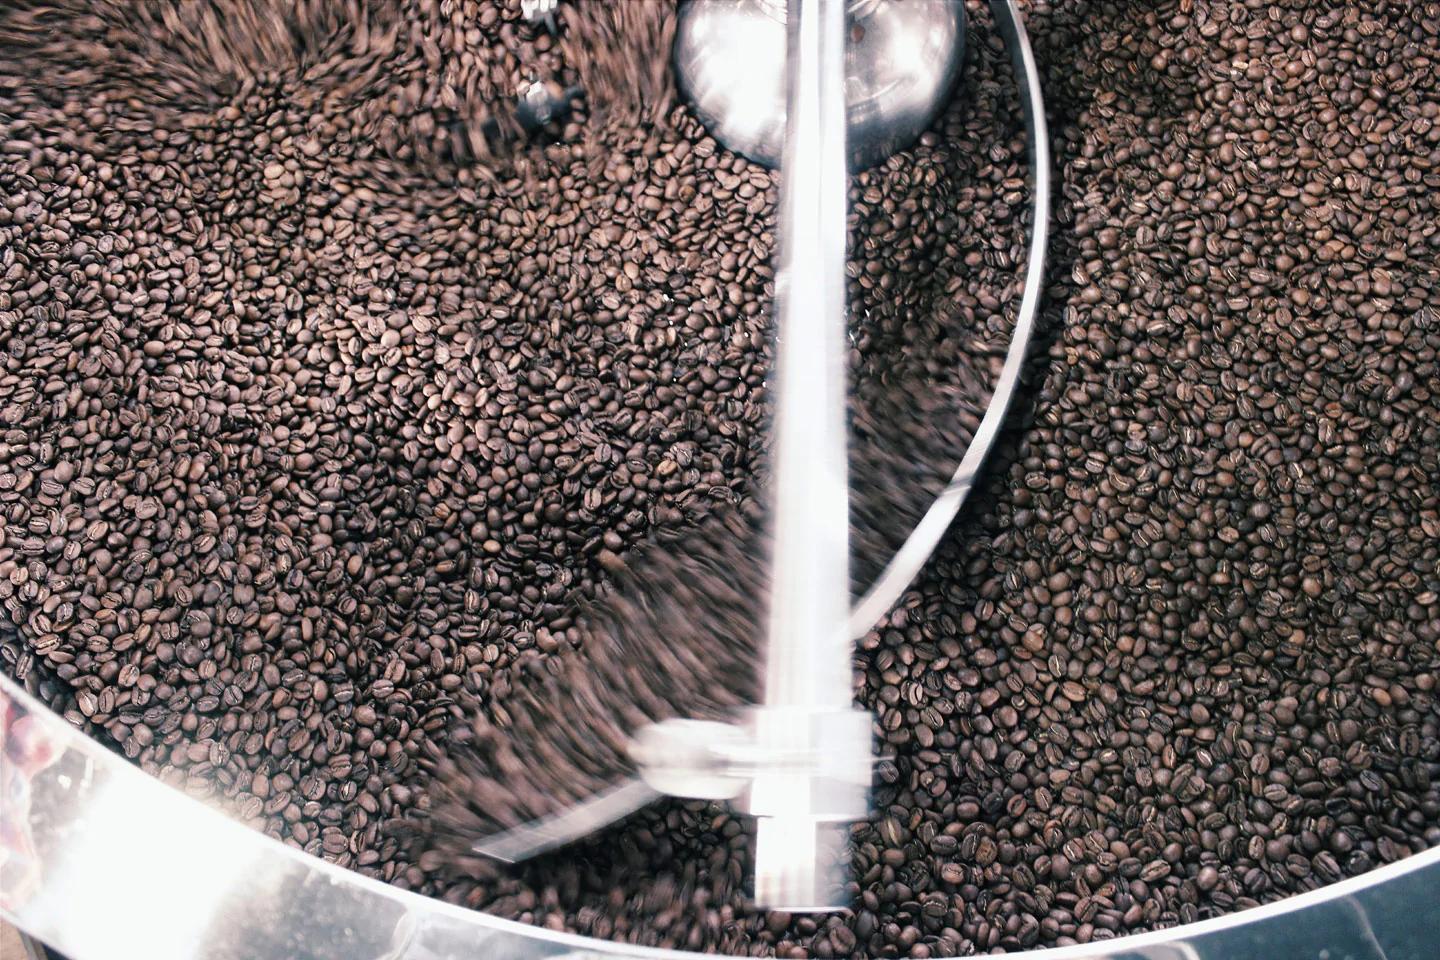 A bunch of coffee beans being roasted. 